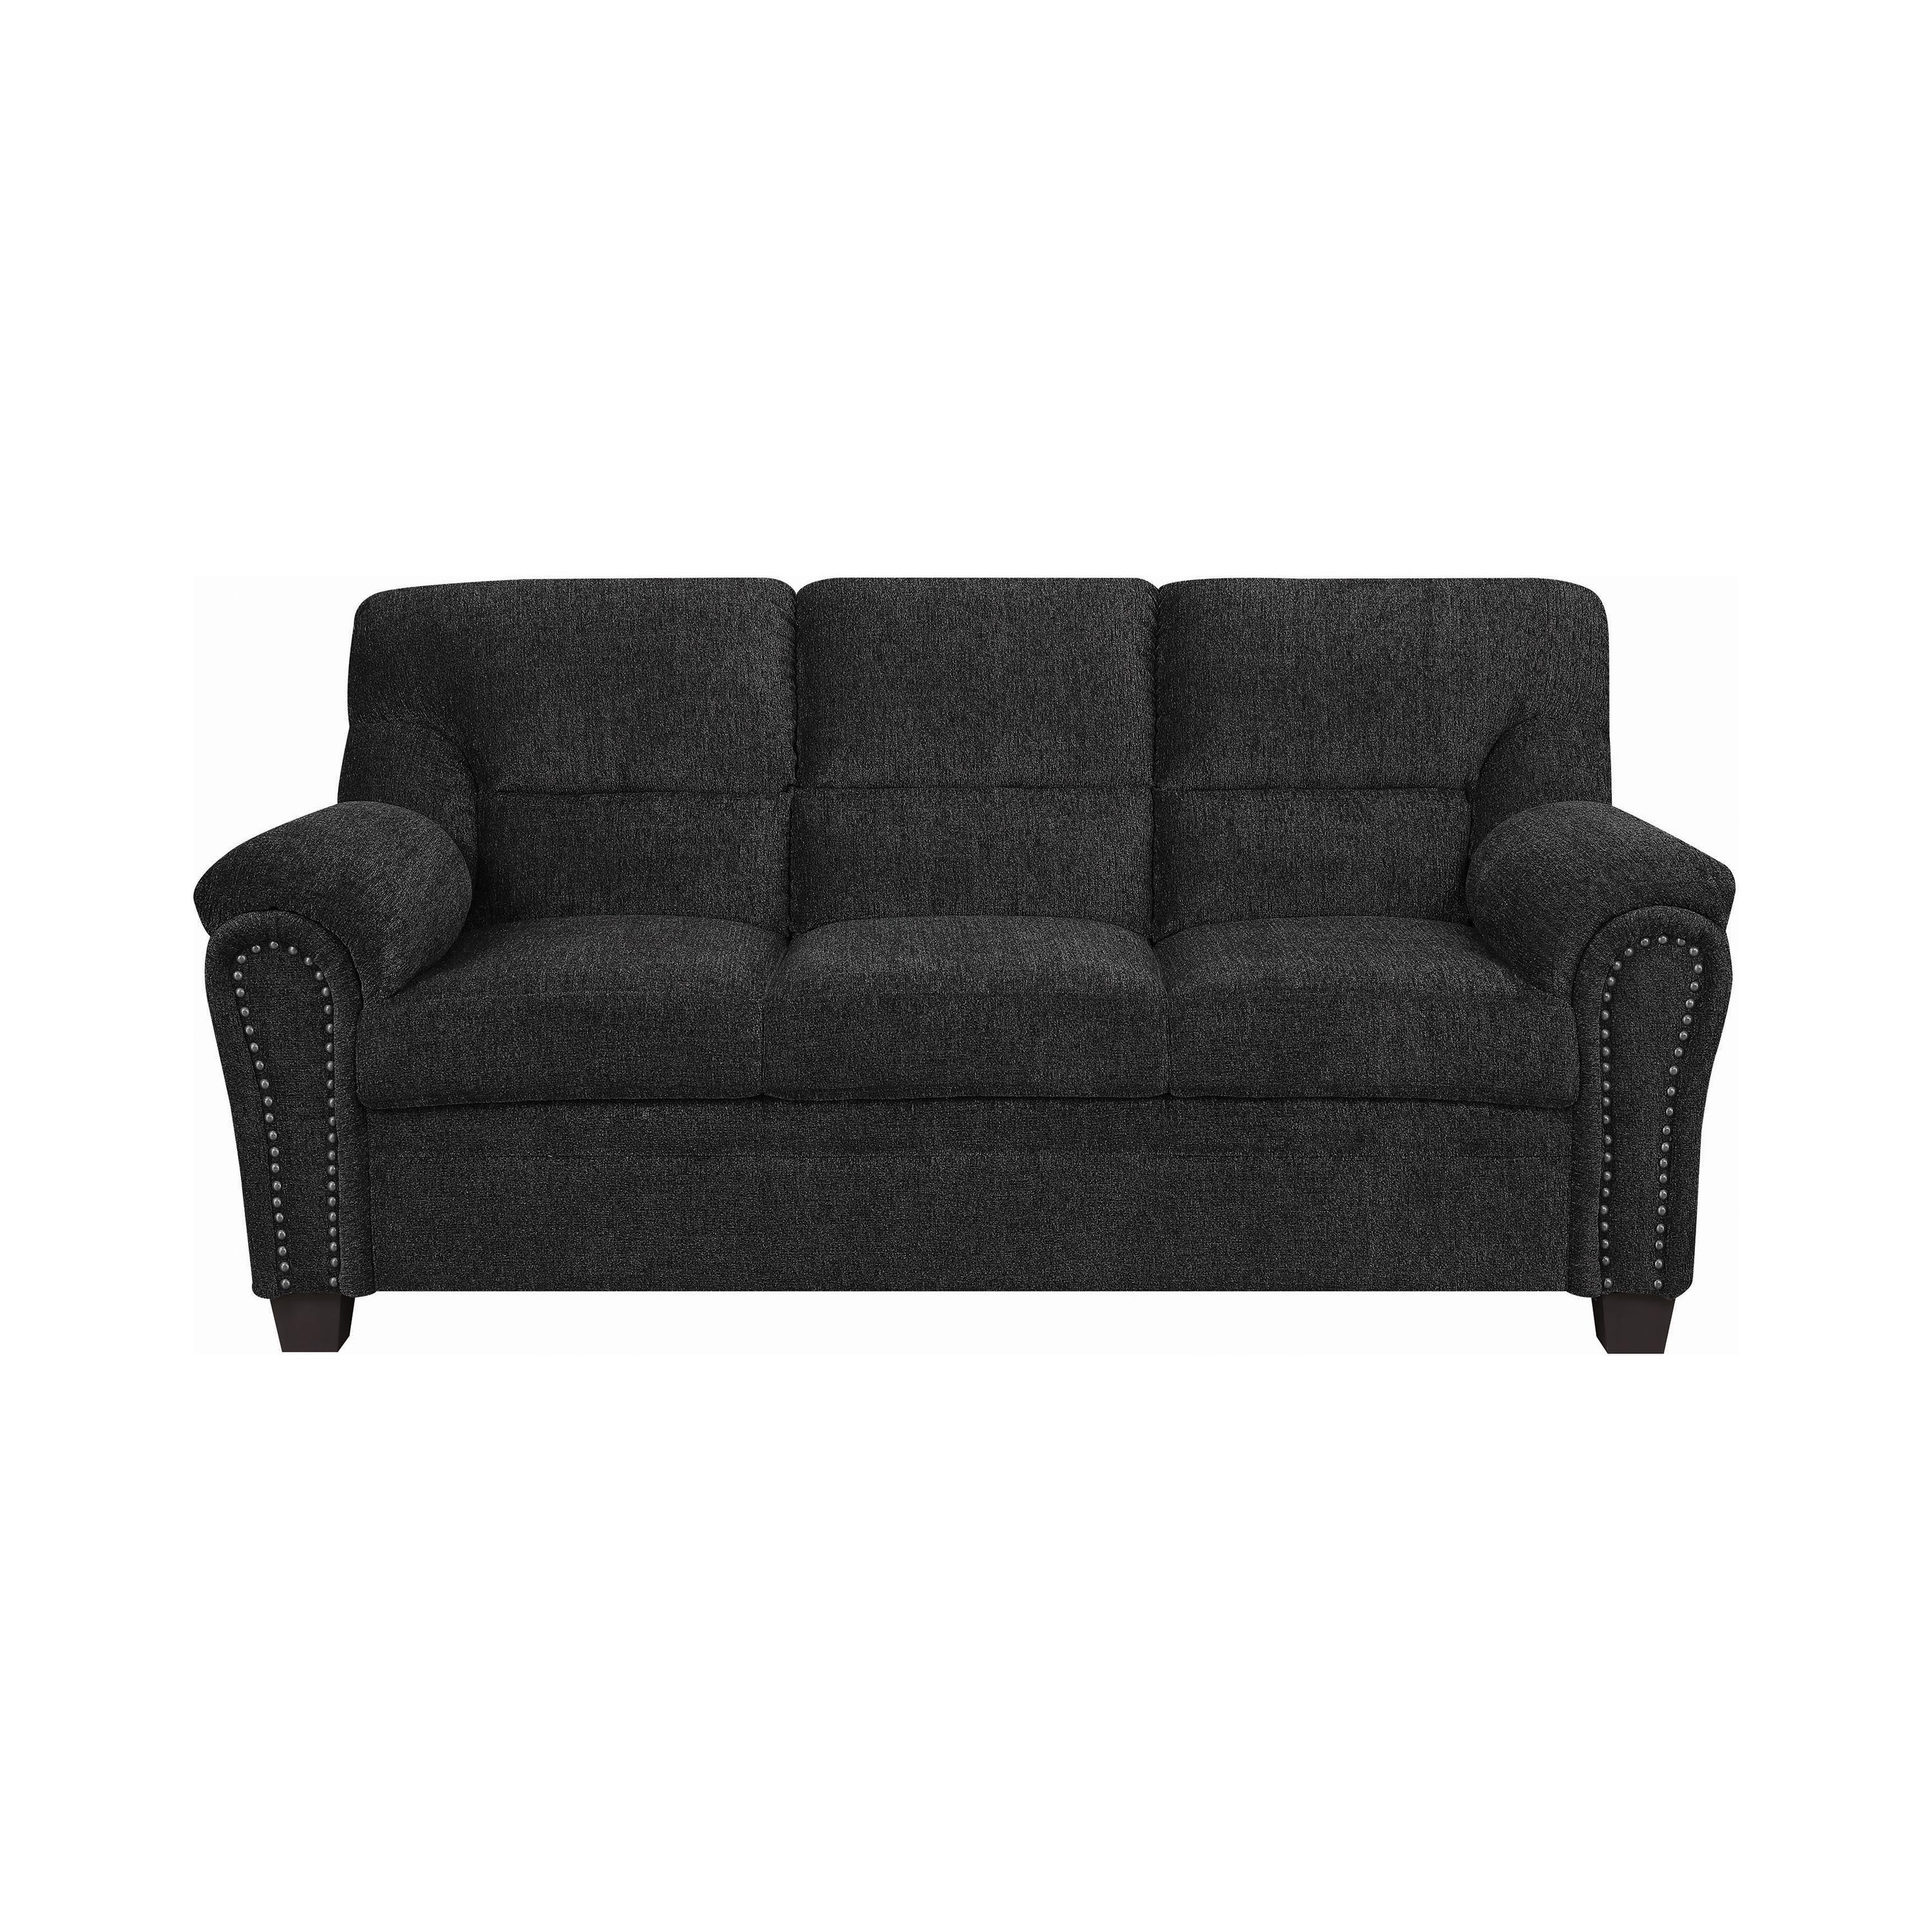 Transitional Sofa 506574 Clemintine 506574 in Graphite Chenille